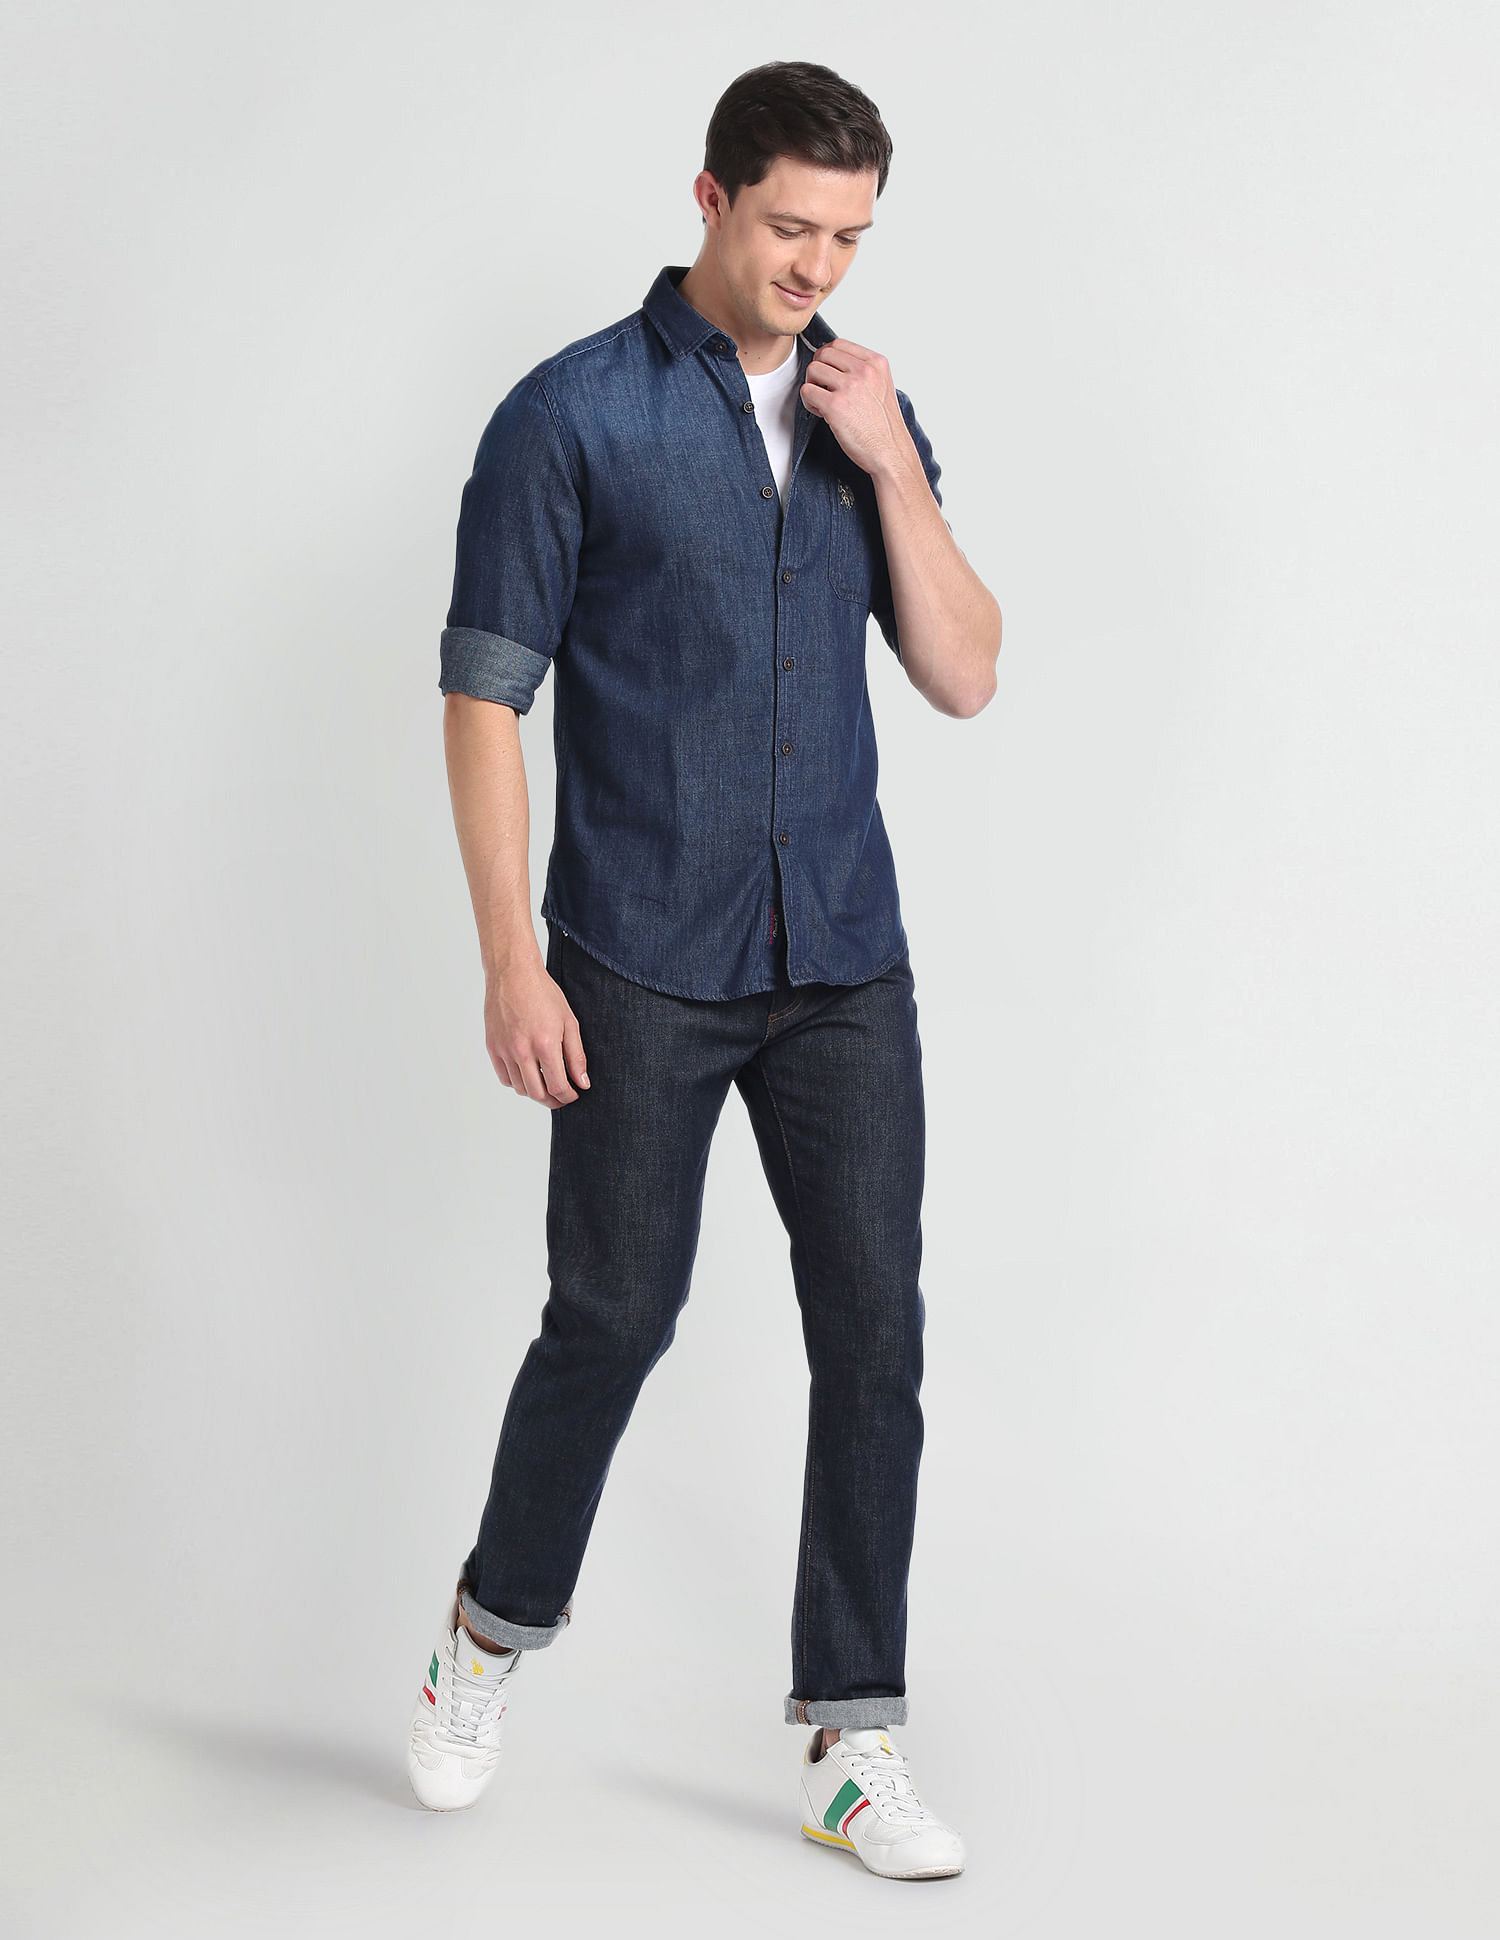 New denim cotton long sleeve shirt Japanese style fresh casual shirt  fashion men's contracted atmosphere long